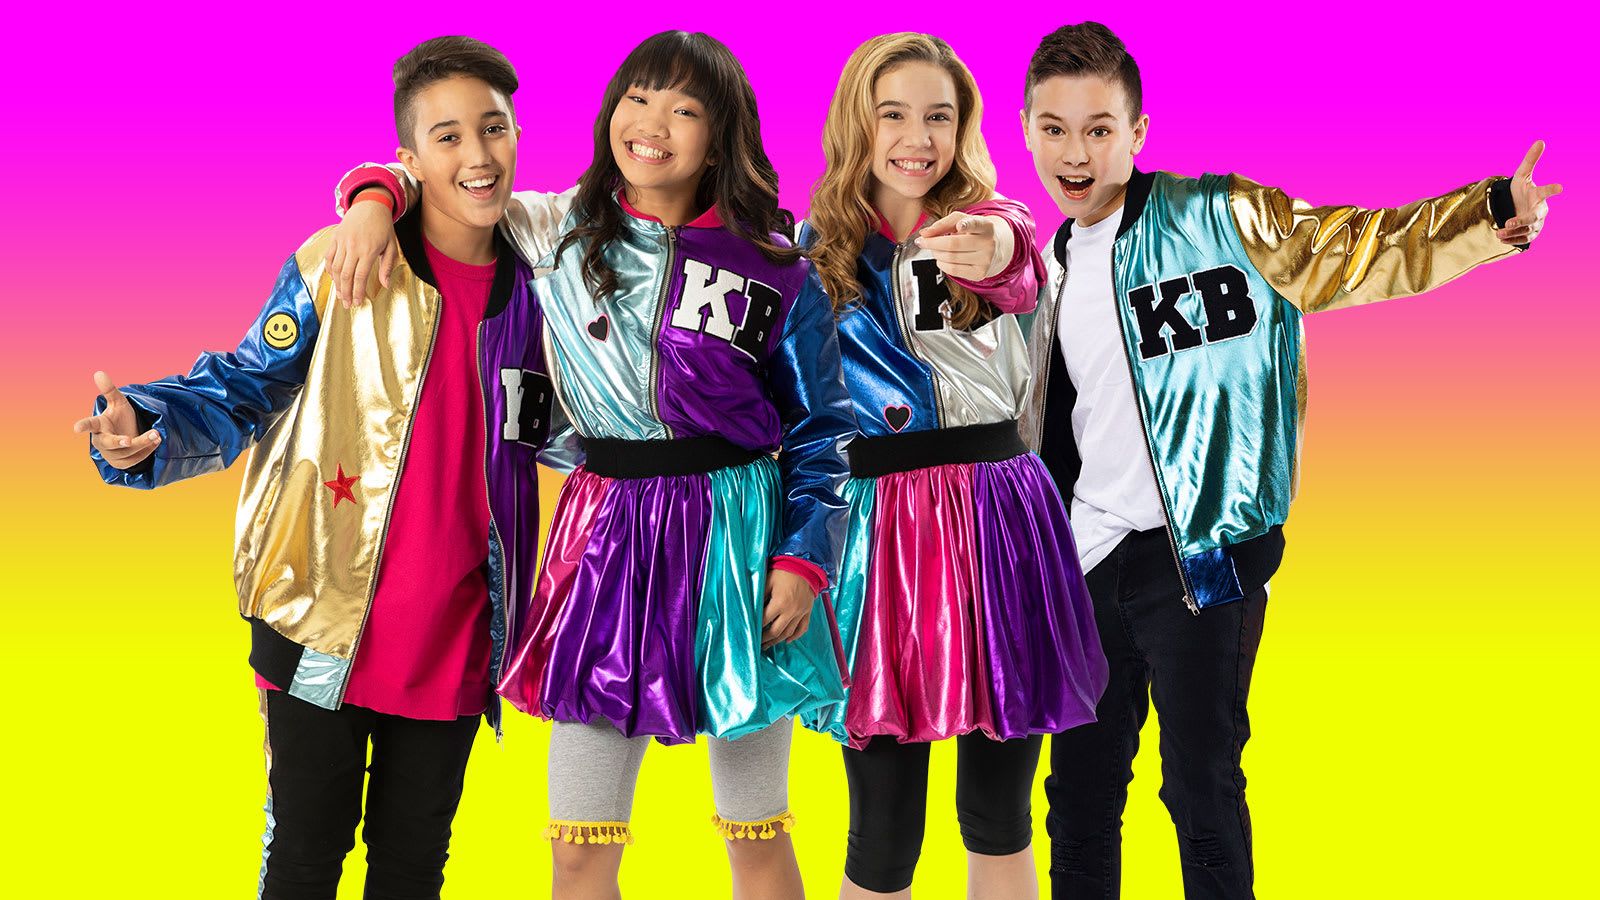 Why Is Kidz Bop Still a Thing?